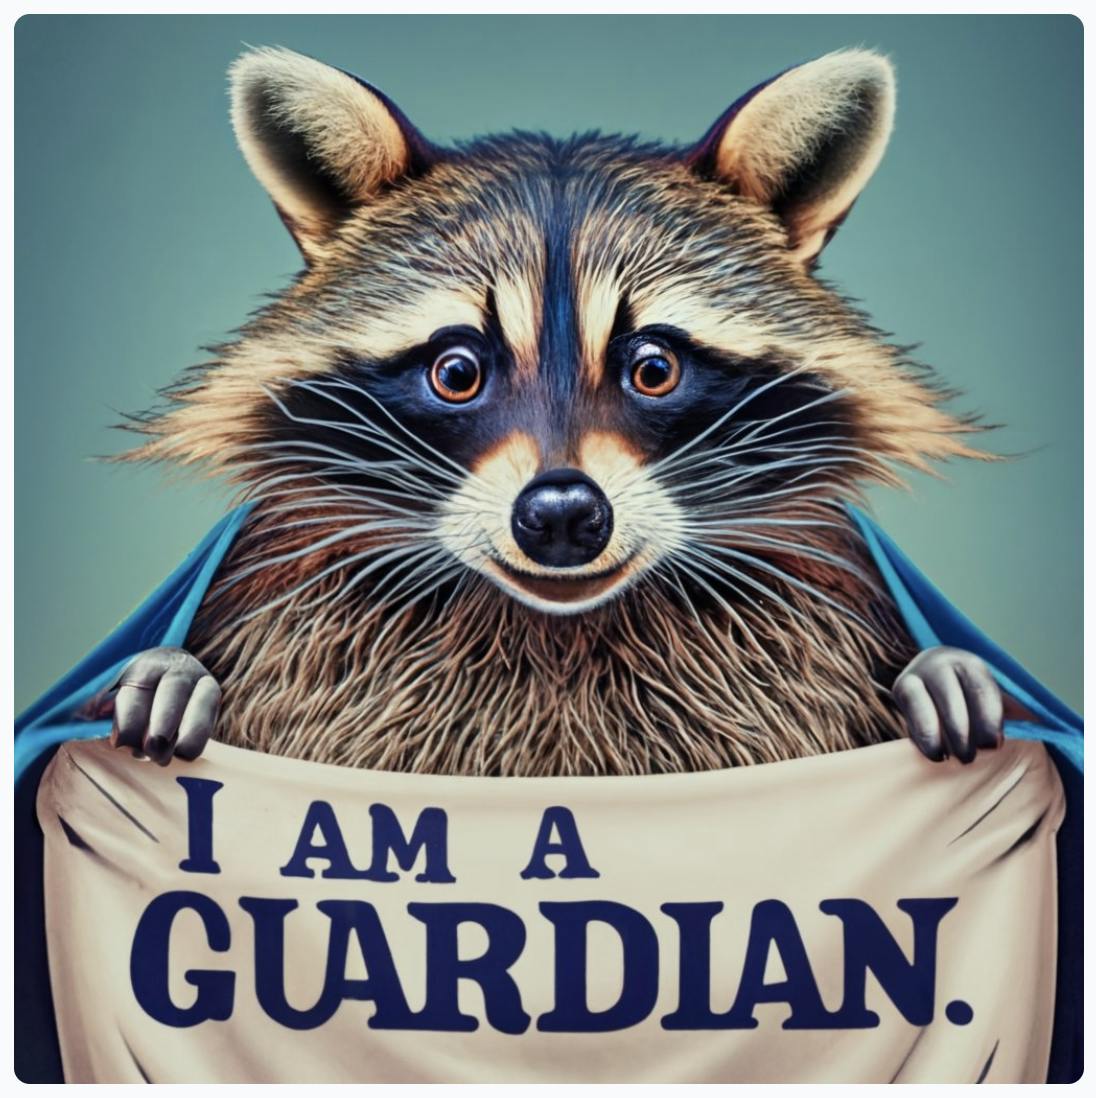 image of a racoon wearing a blue cape and holding a sign that reads "I am a guardian."